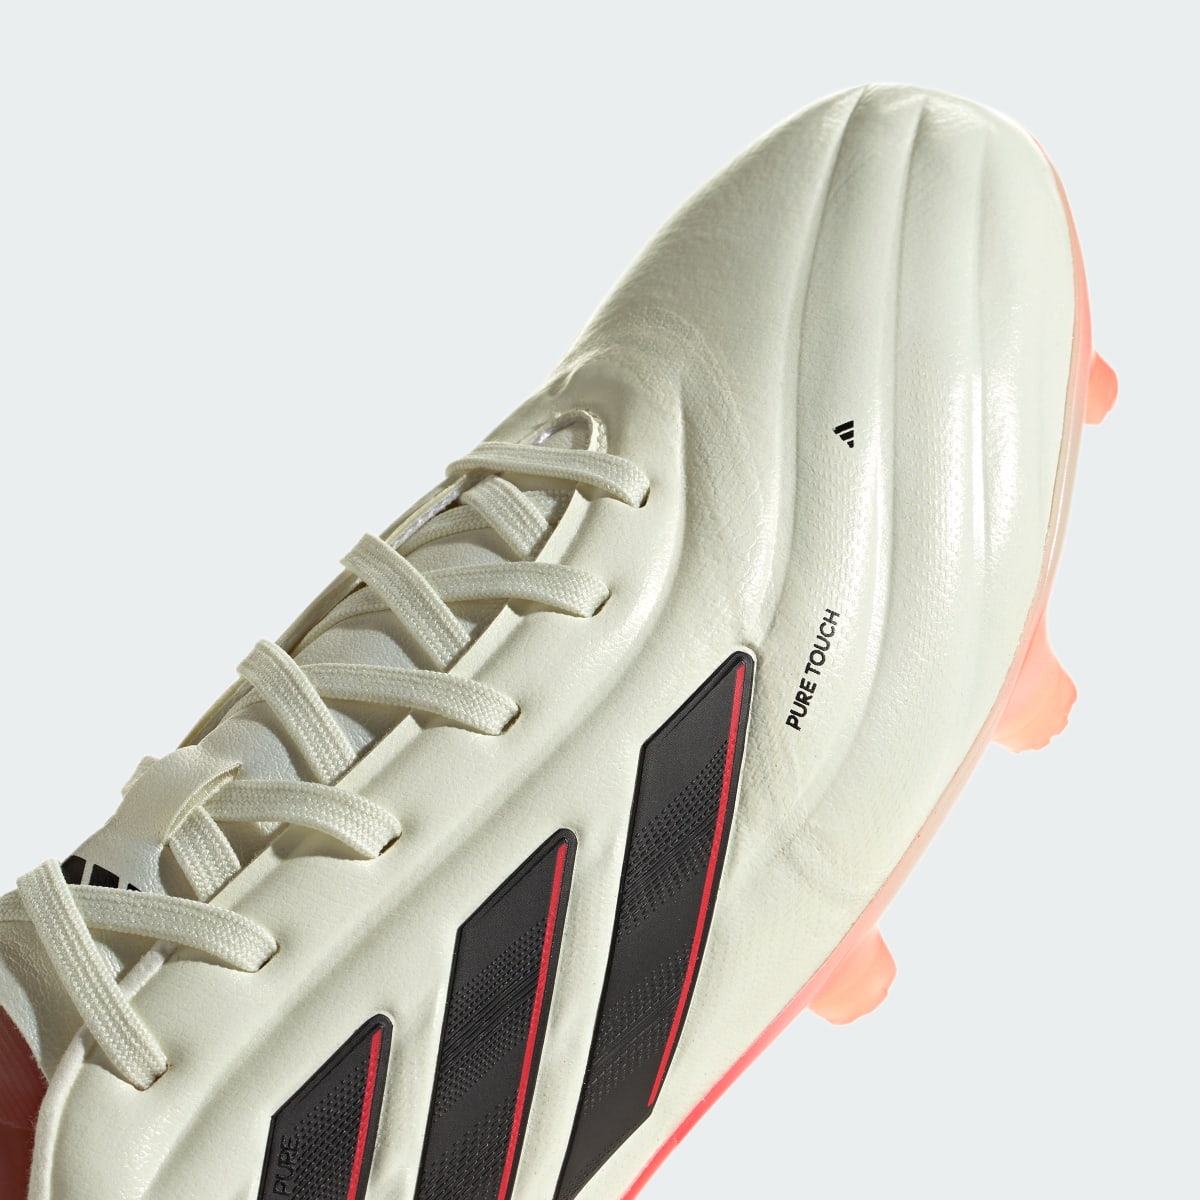 Adidas Copa Pure II Pro Firm Ground Boots. 10